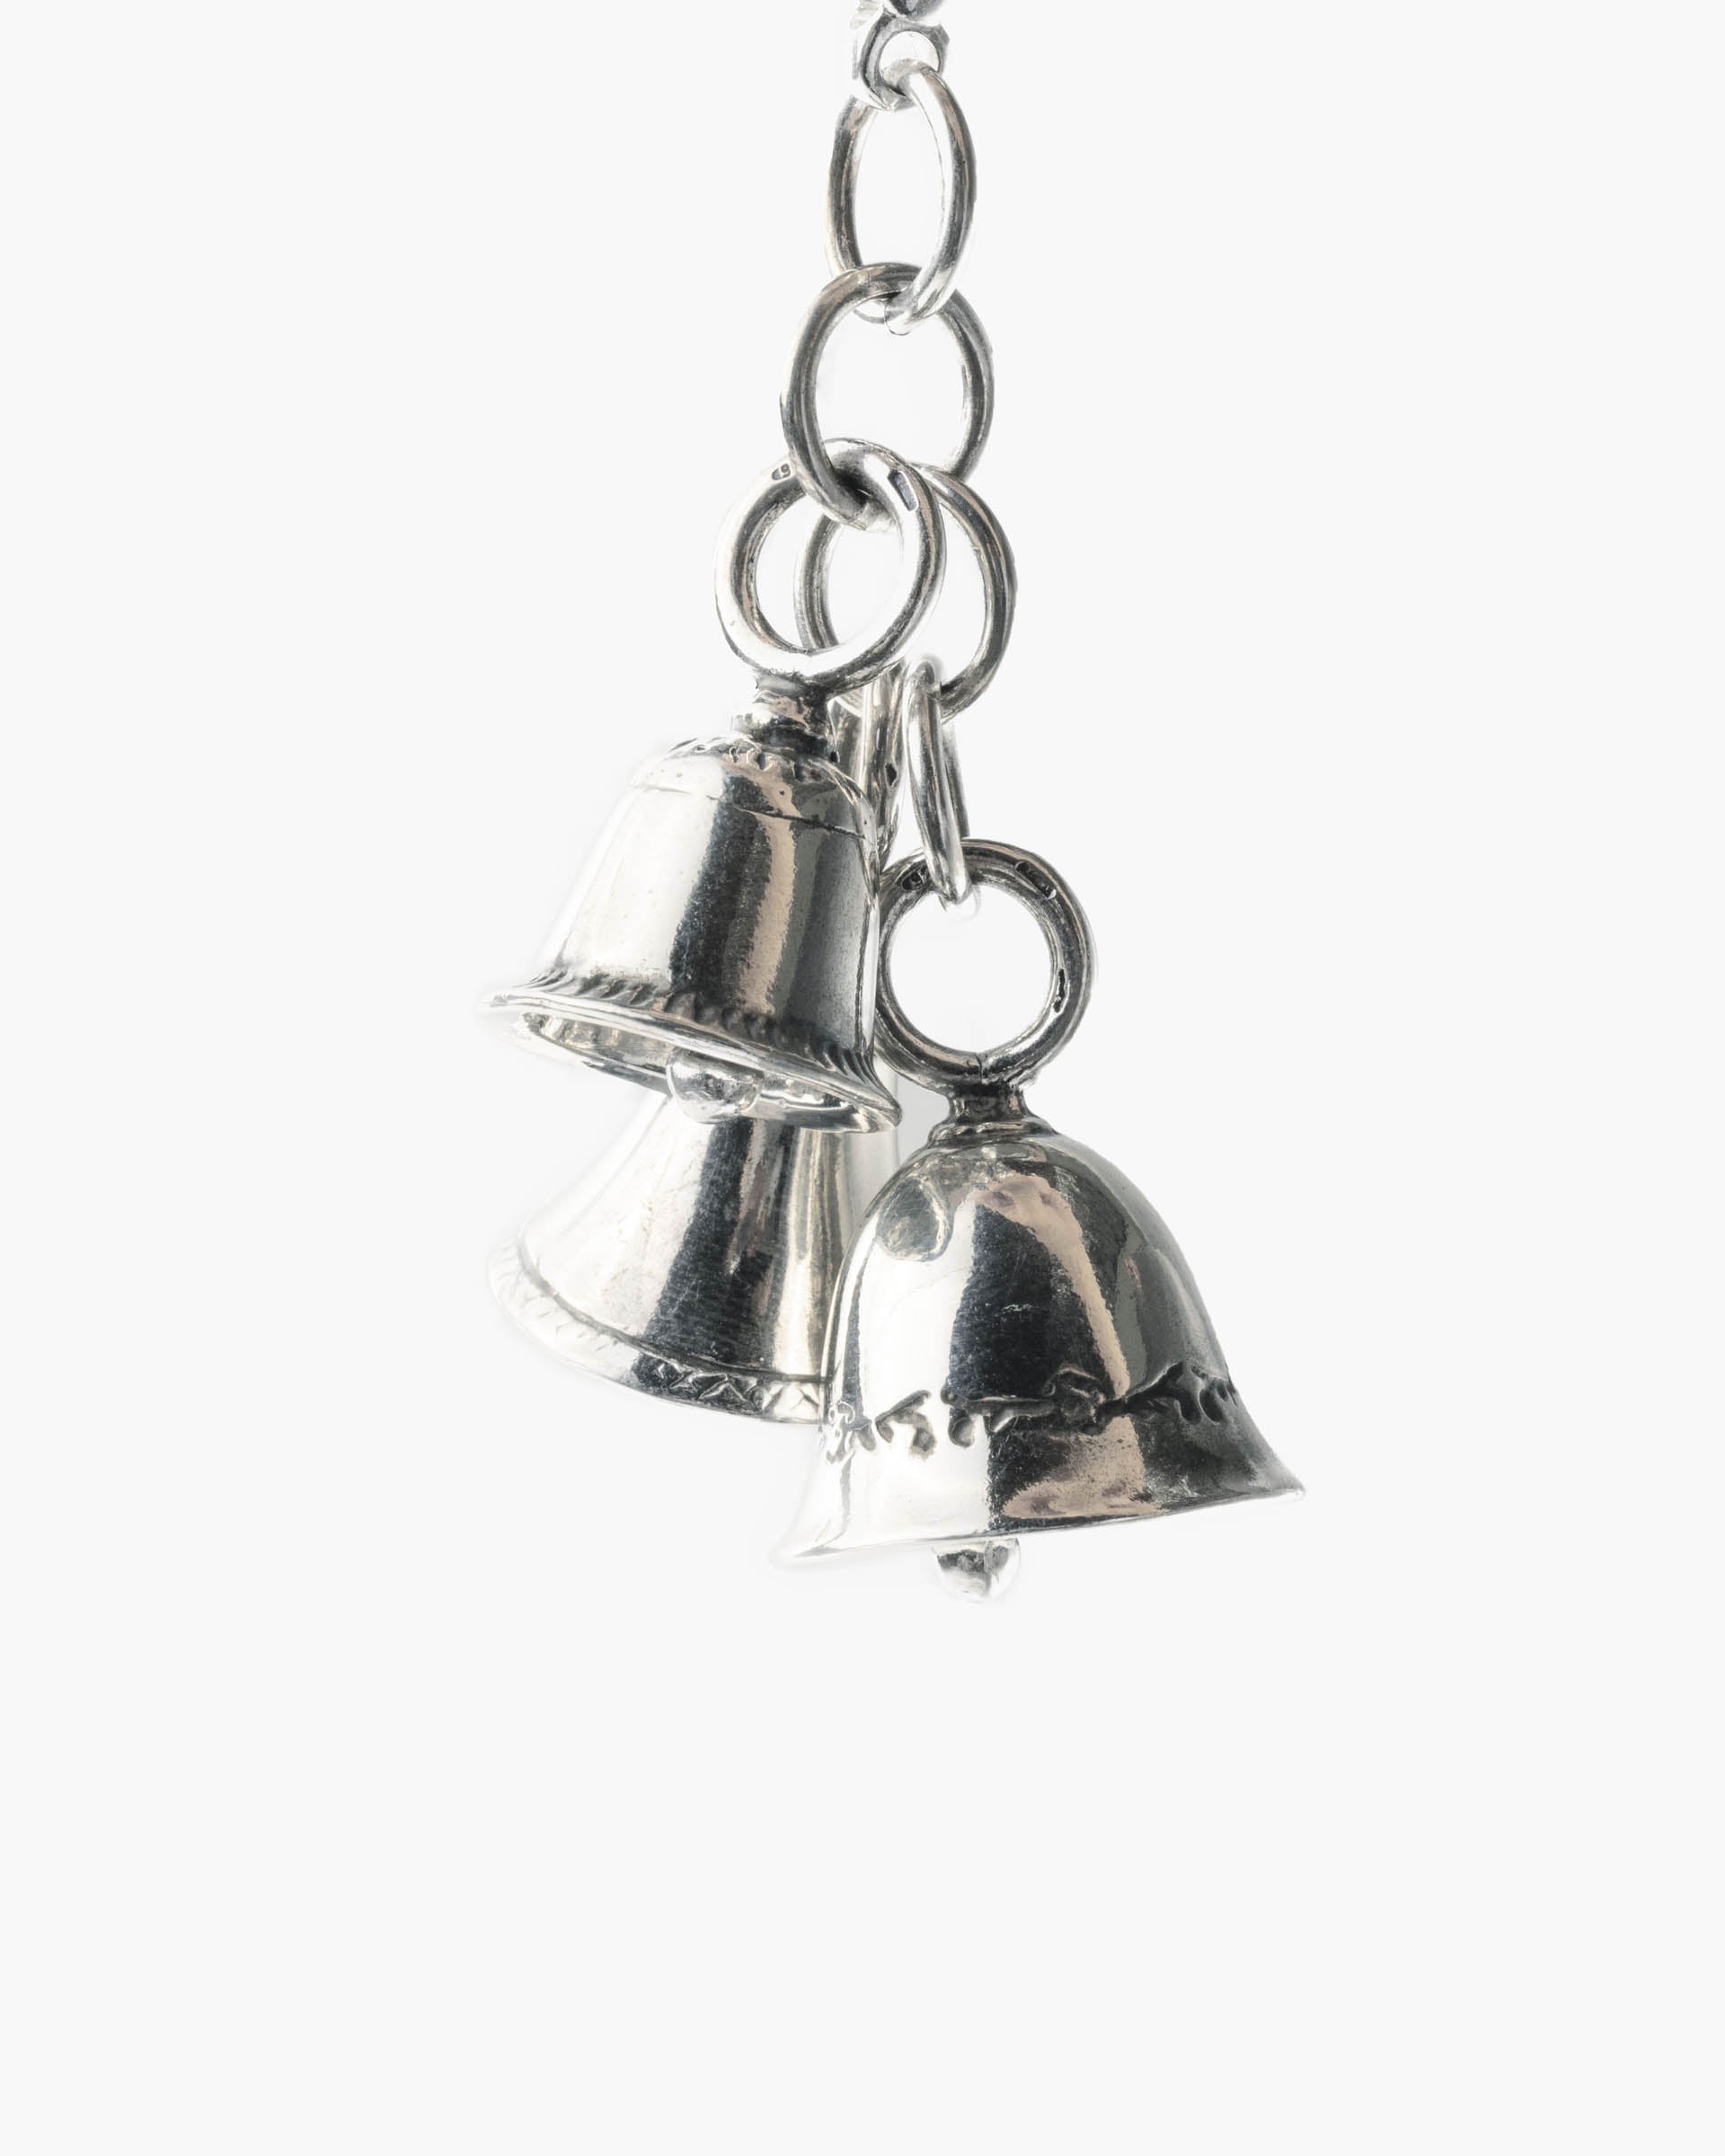 60 Pcs Bell Pendant Keychain Charms Bulk Ring The Bell Child